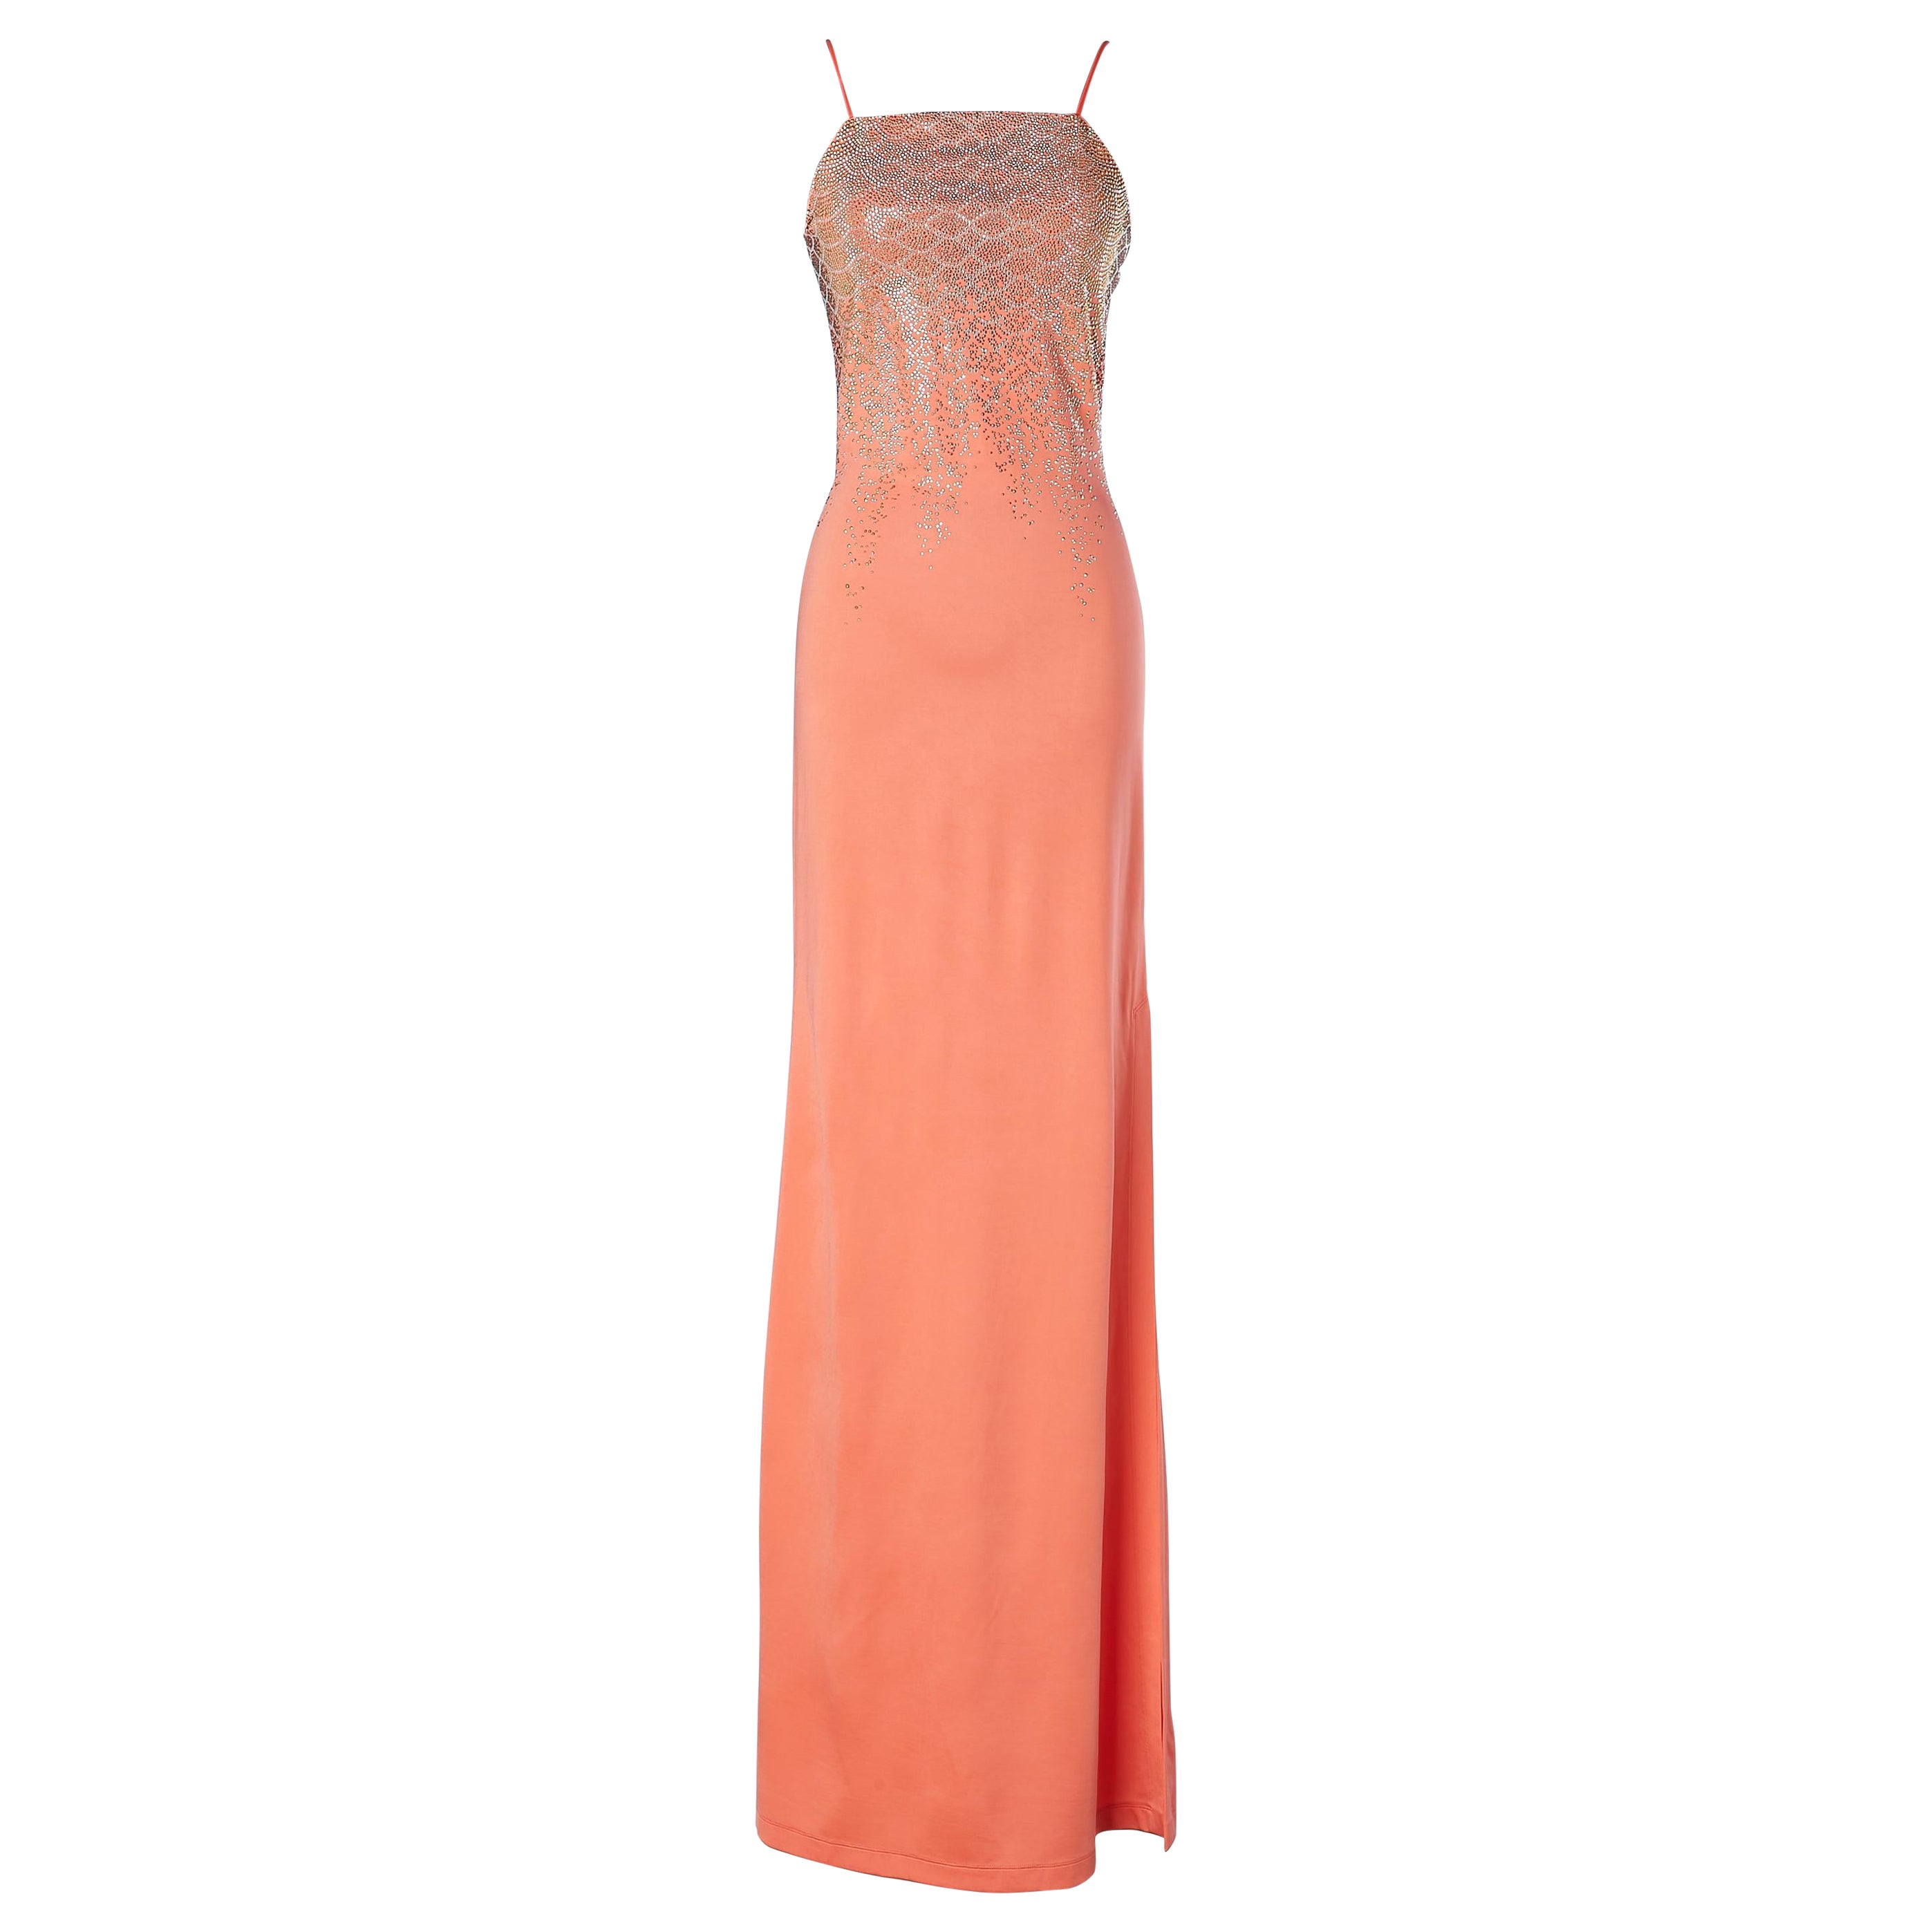 Salmon pink evening dress with three colors studs appliqué Just Cavalli NEW 